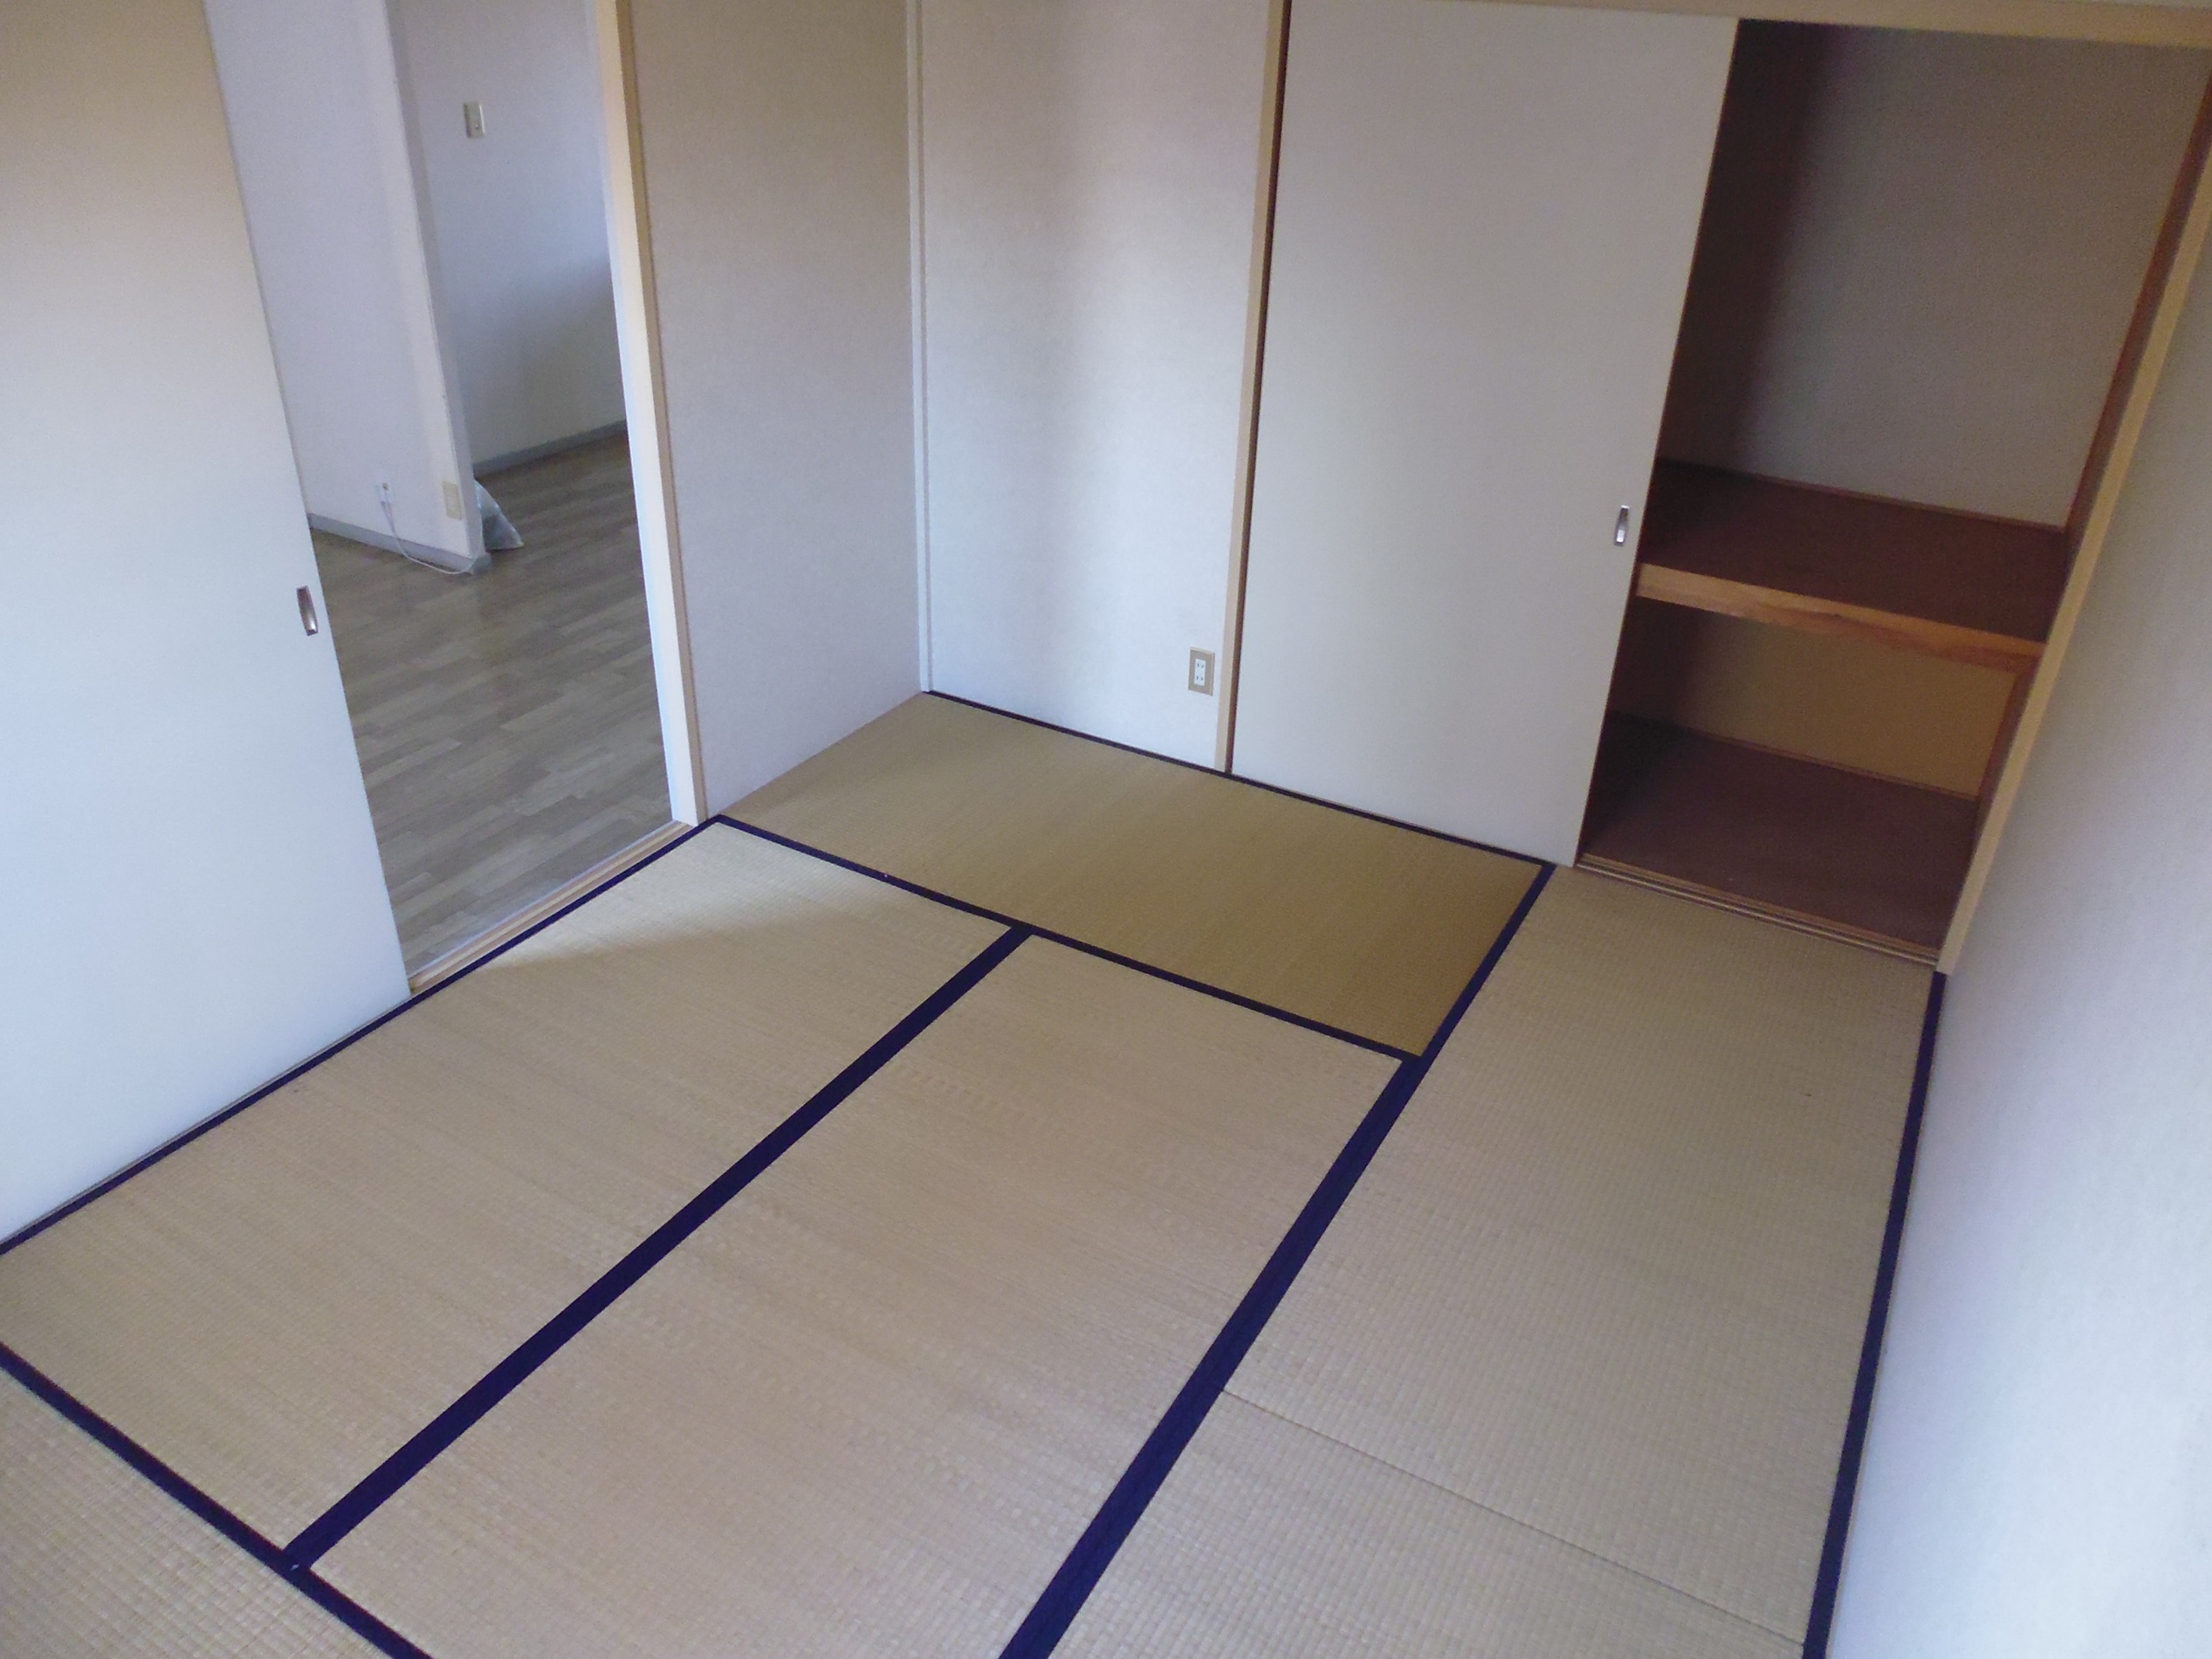 Living and room. After all, I'm Japanese, if Japanese-style room.